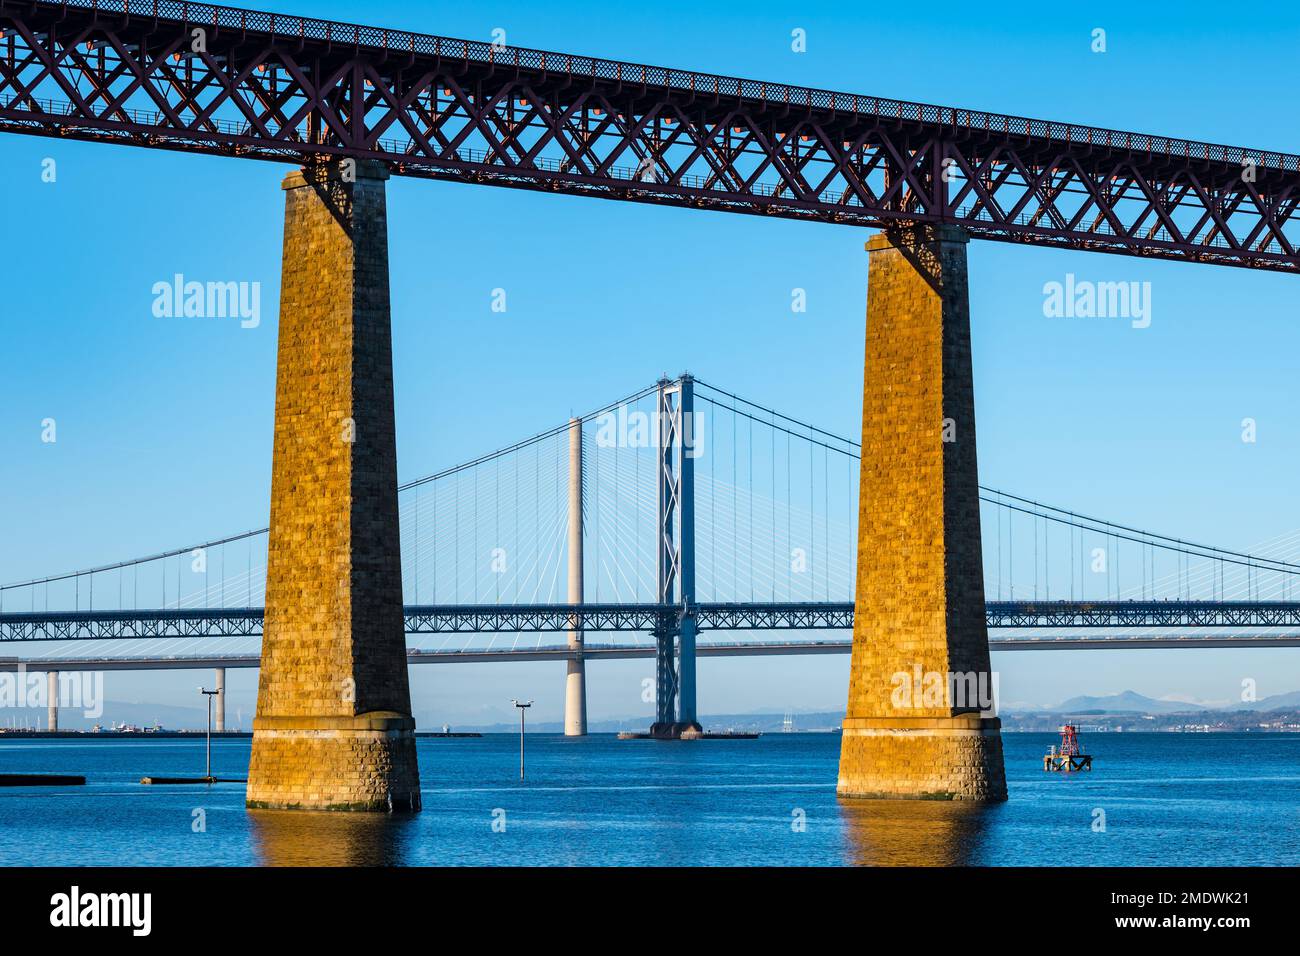 Forth bridges: Forth Rail bridge, Forth Road bridge and Queensferry Crossing on sunny day with clear blue sky, Firth of Forth, Scotland, UK Stock Photo